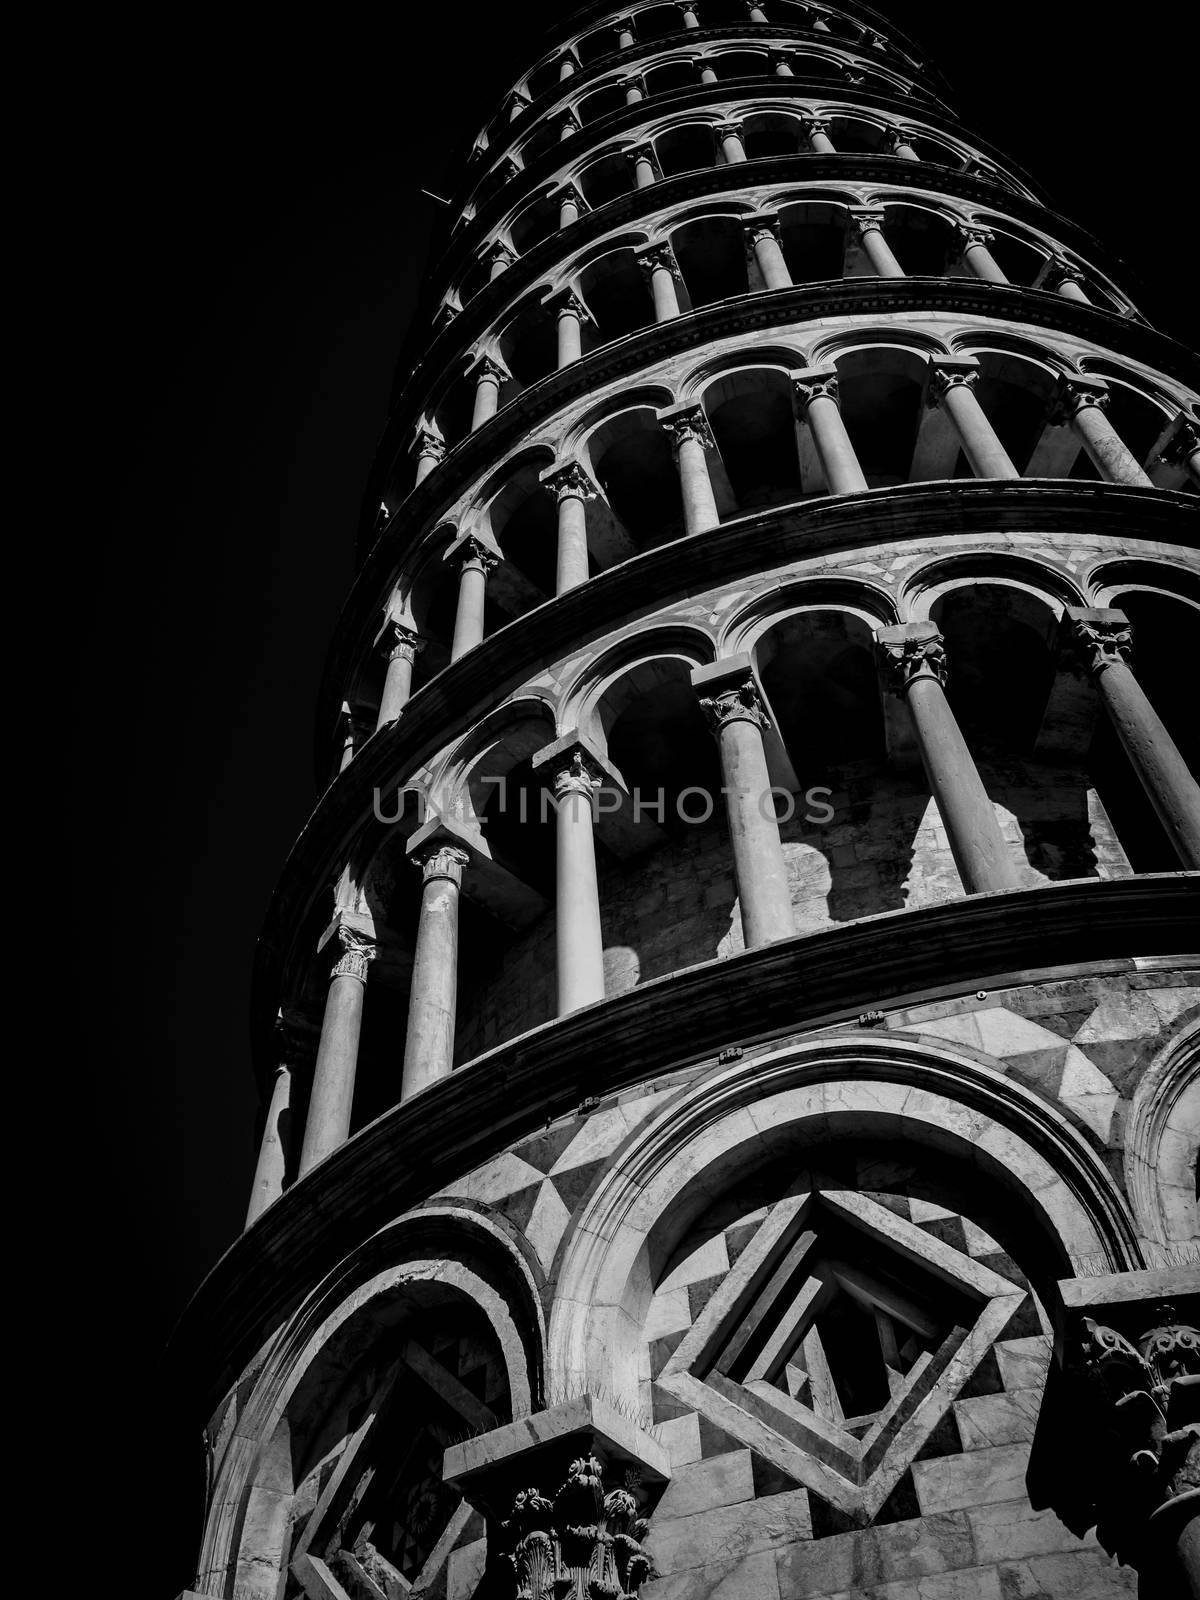 Picture of the famous cathedral and leaning tower in Pisa, Tuscany, Italia